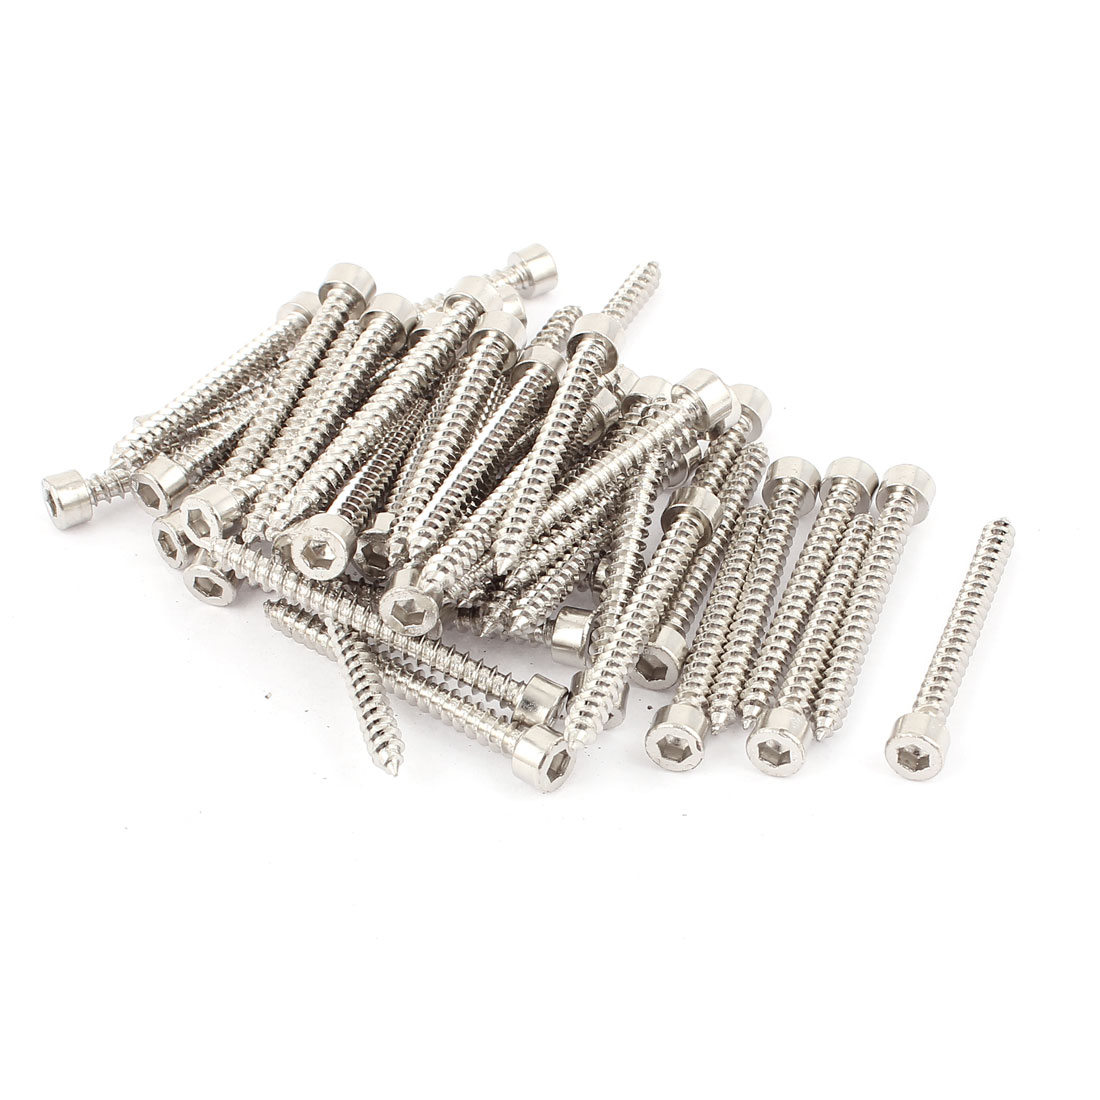 5mm x 50mm Full Thread Nickel Plated Hex Head Self Tapping Screws 50pcs - image 1 of 1